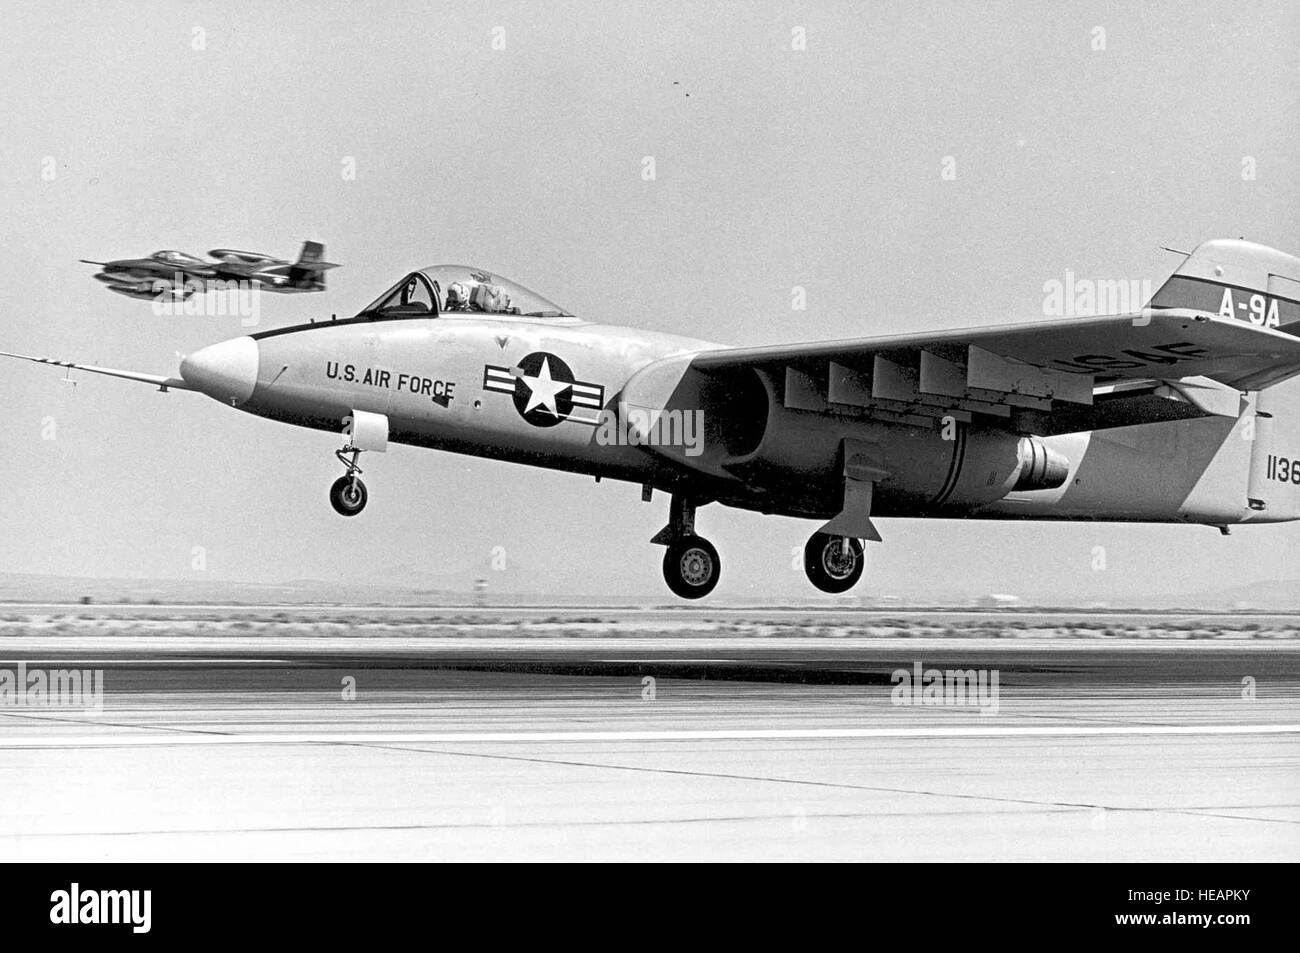 Northrop A-9A just before touchdown on its first flight. Note the Cessna A-37 chase plane in the background. (U.S. Air Force photo) Stock Photo